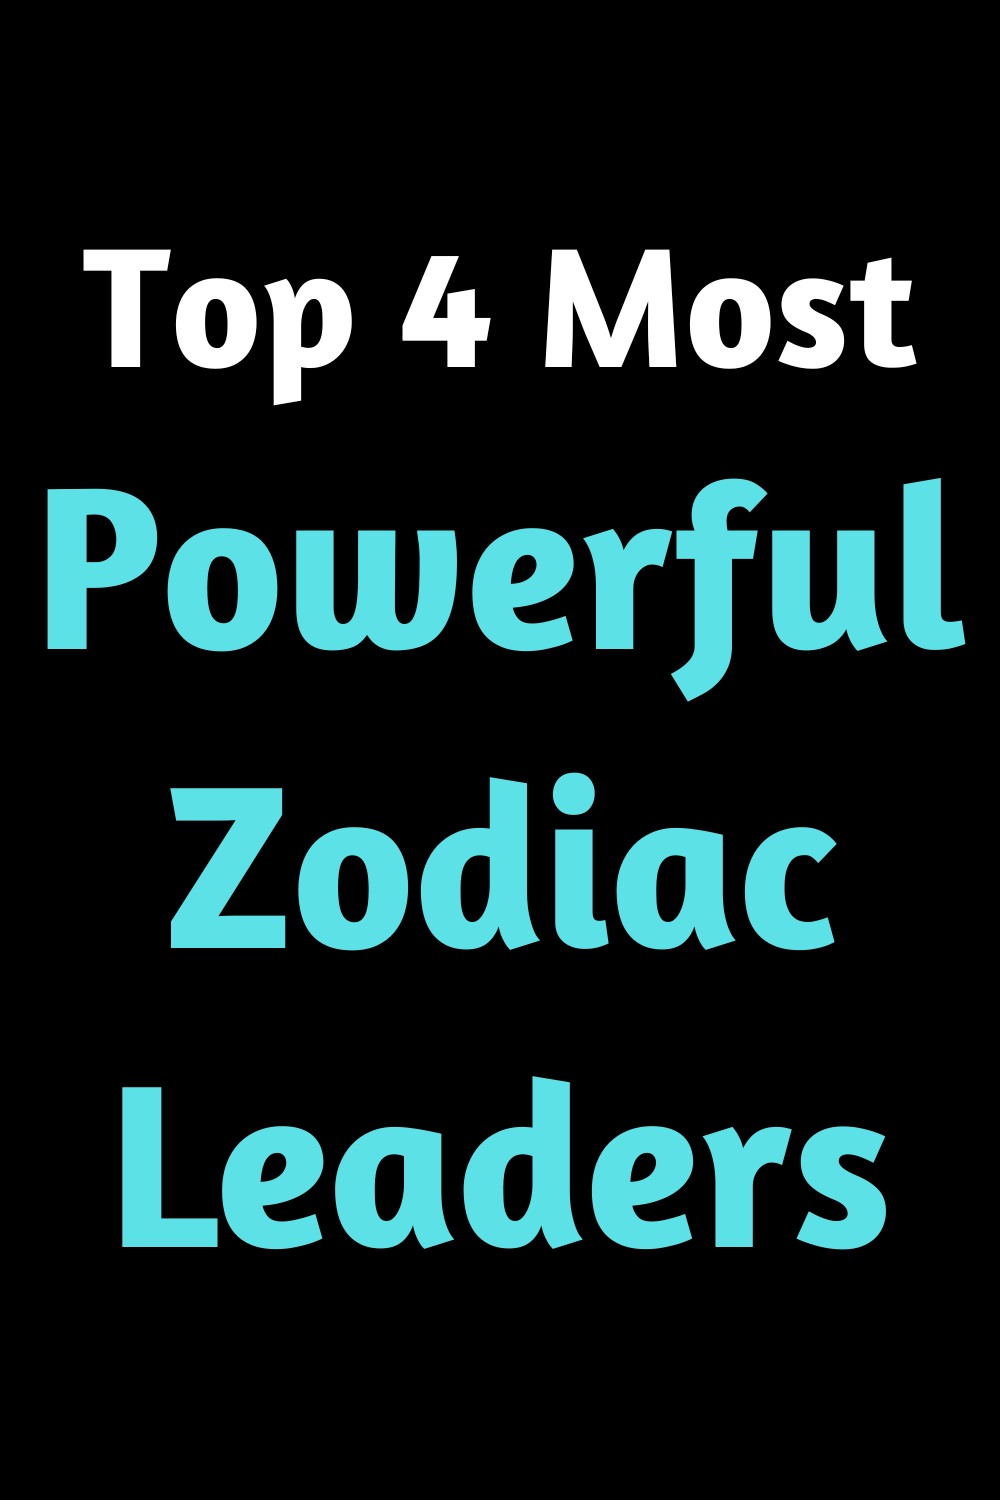 Top 4 Most Powerful Zodiac Leaders